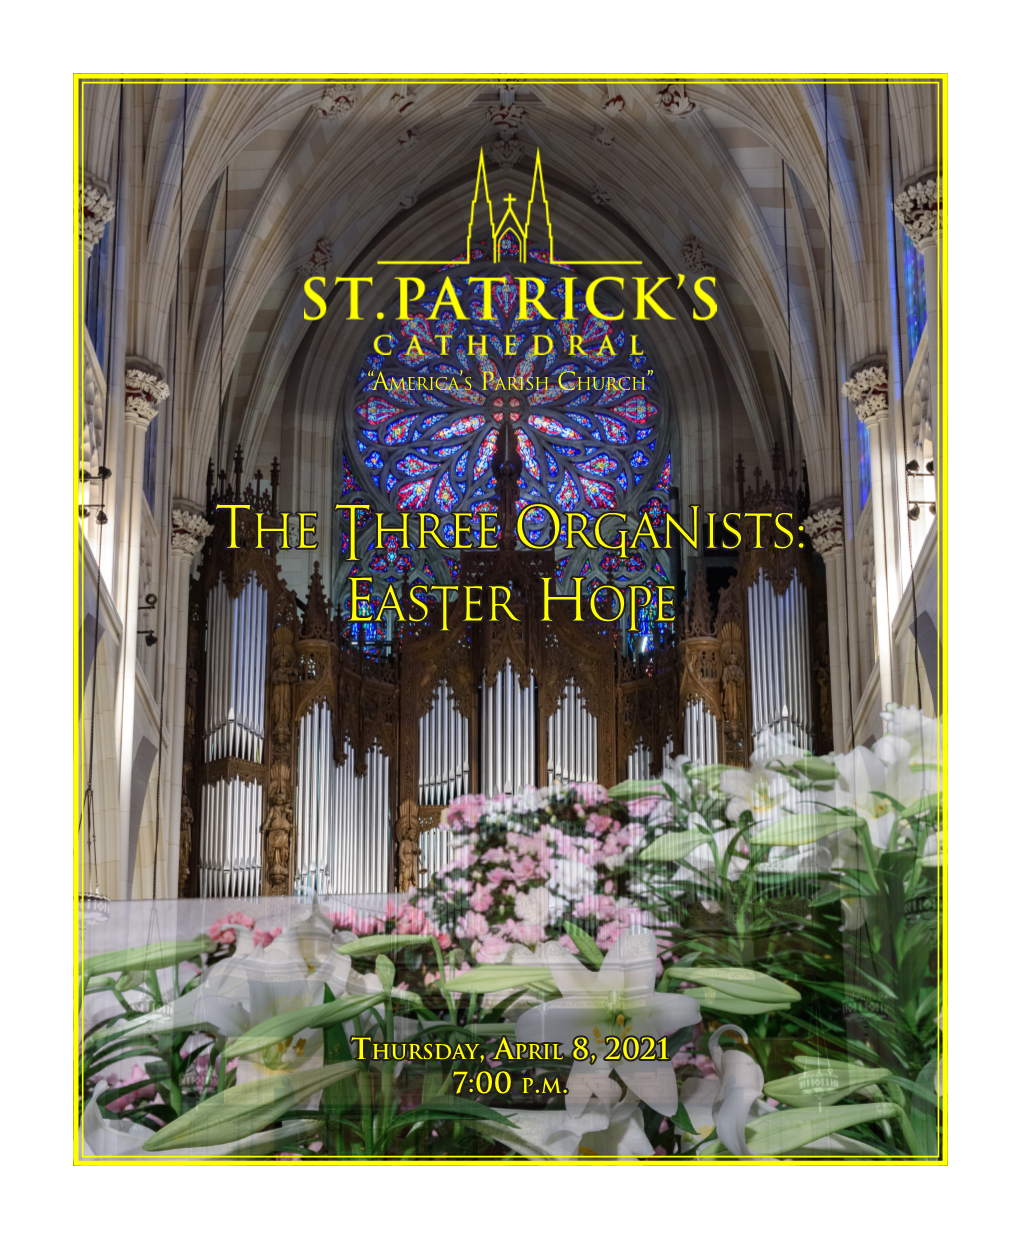 The Three Organists: Easter Hope